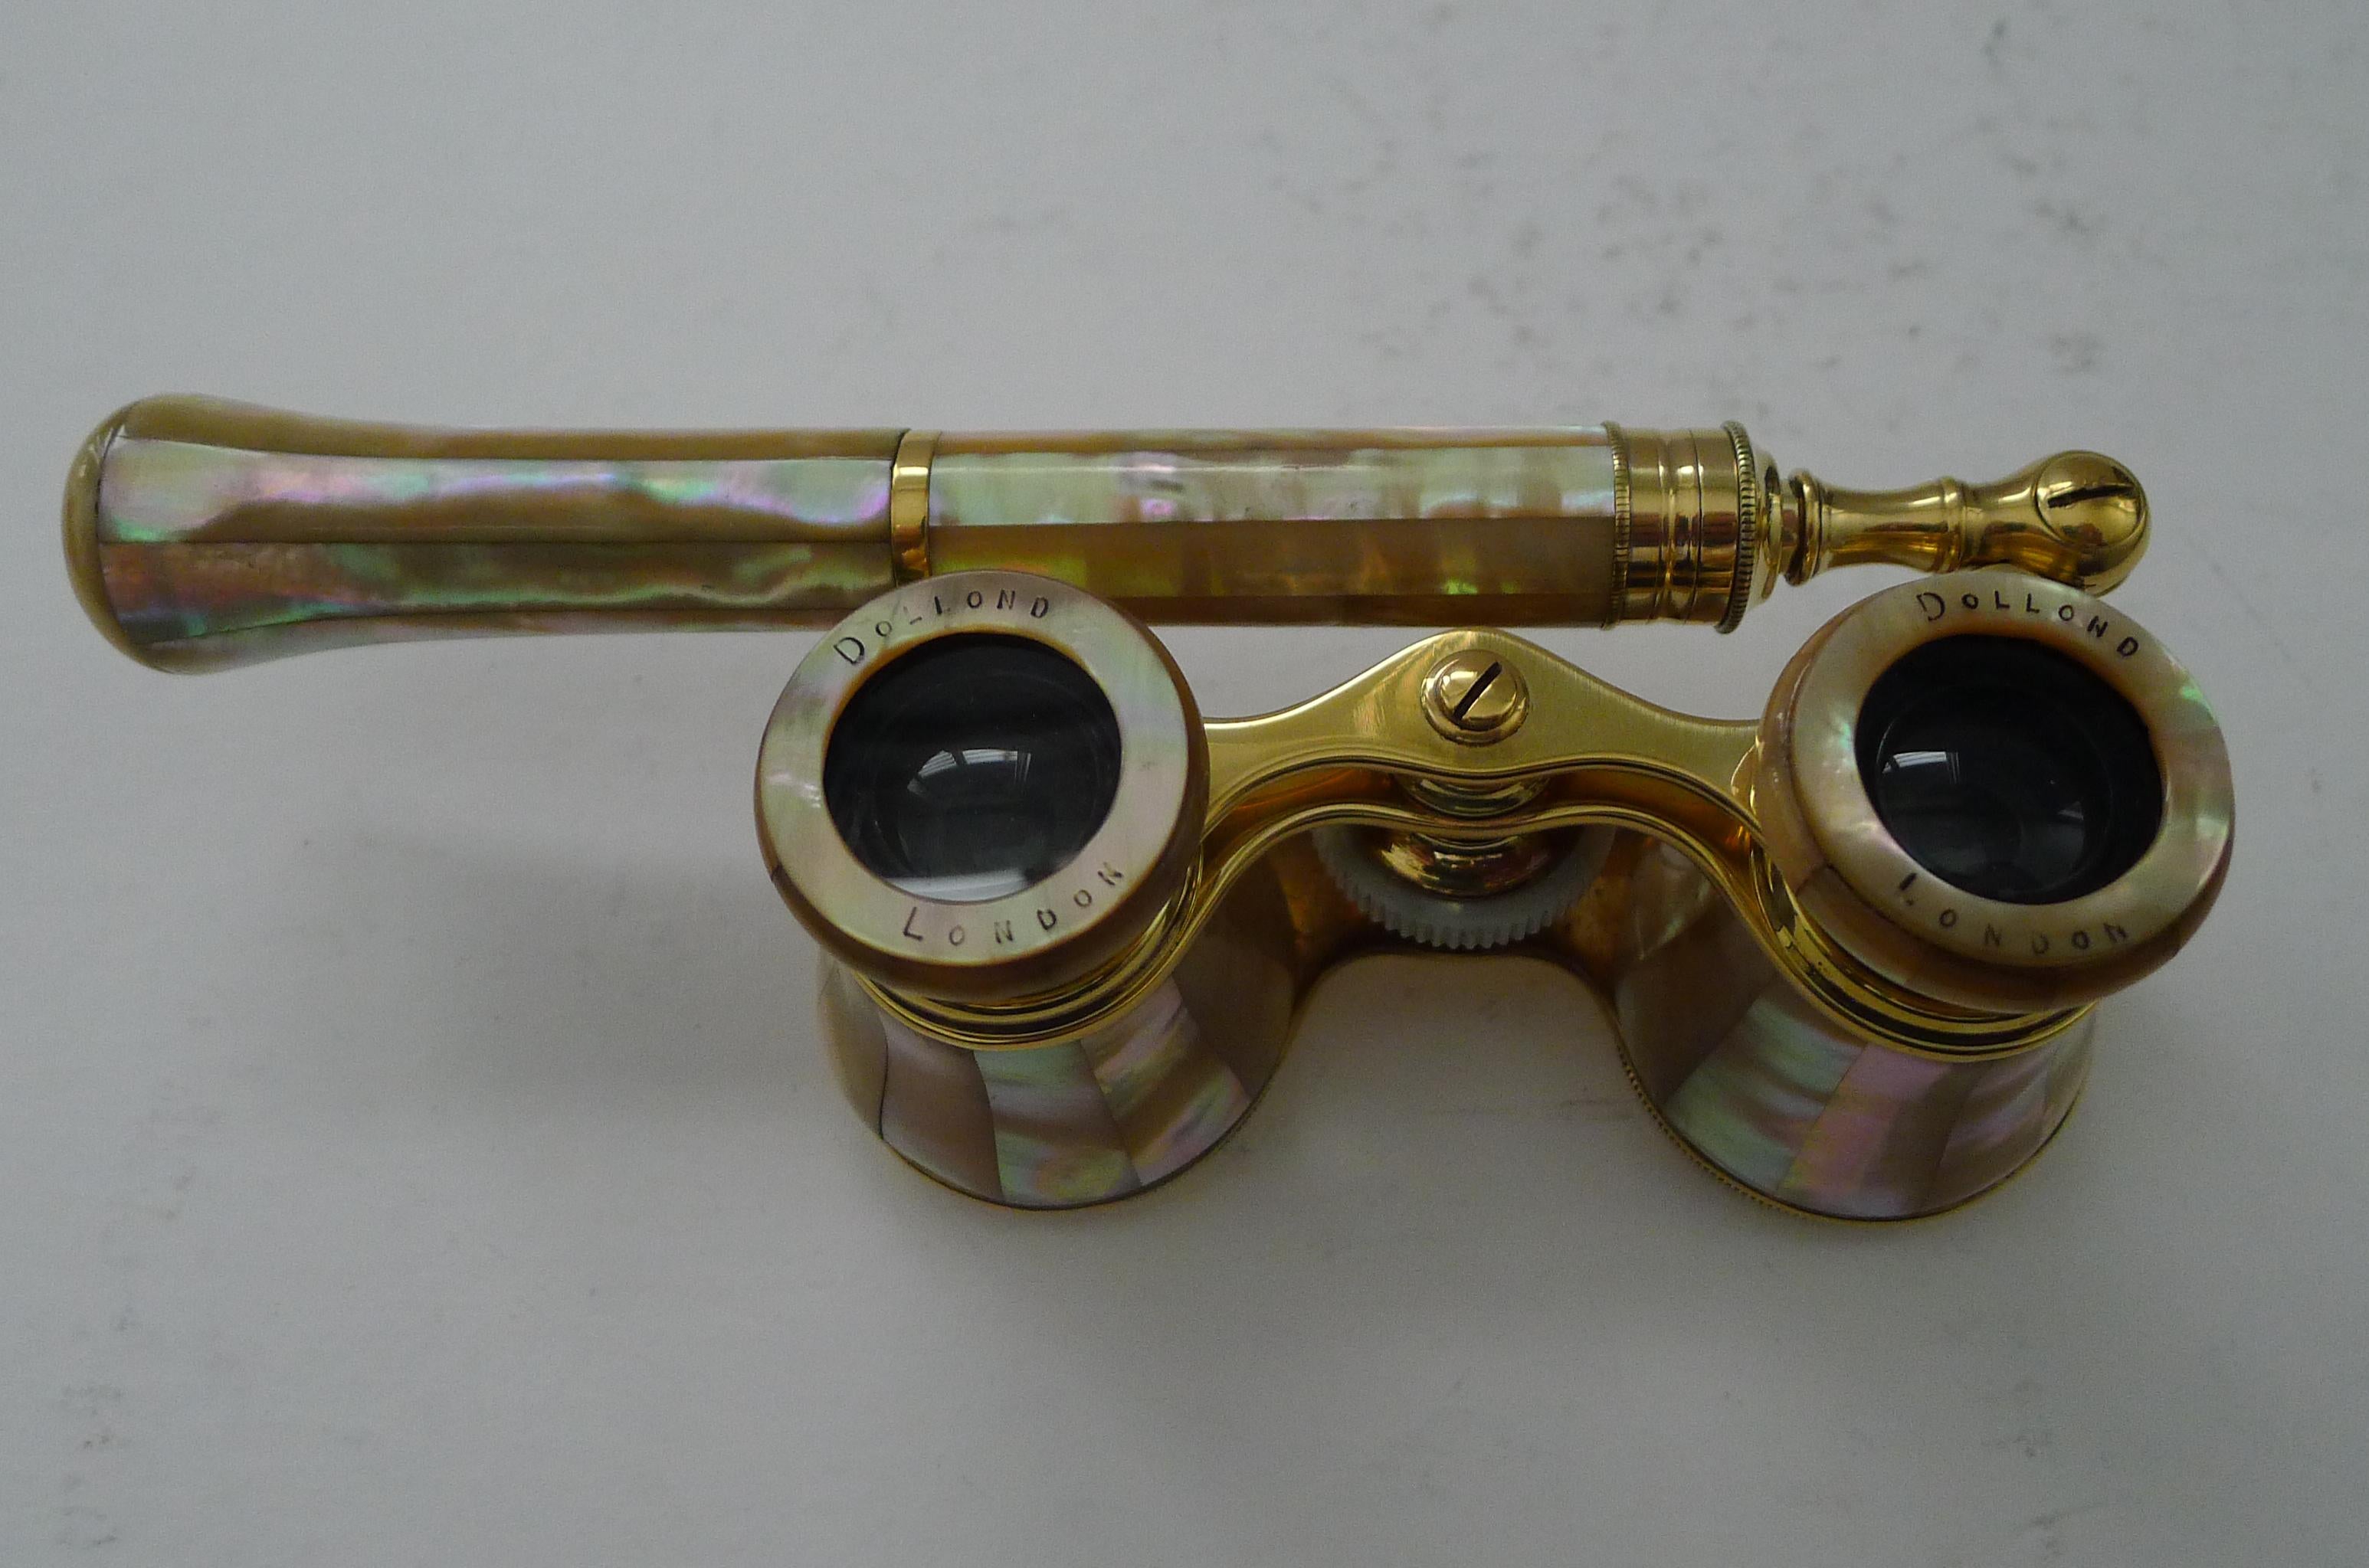 A splendid pair of Edwardian Opera / Theatre glasses professionally re-polished to gleam, making them as good as they would have looked over 100 years ago.

This is a pair with a telescopic lorgnette handle. All is wrapped in wonderful Mother of